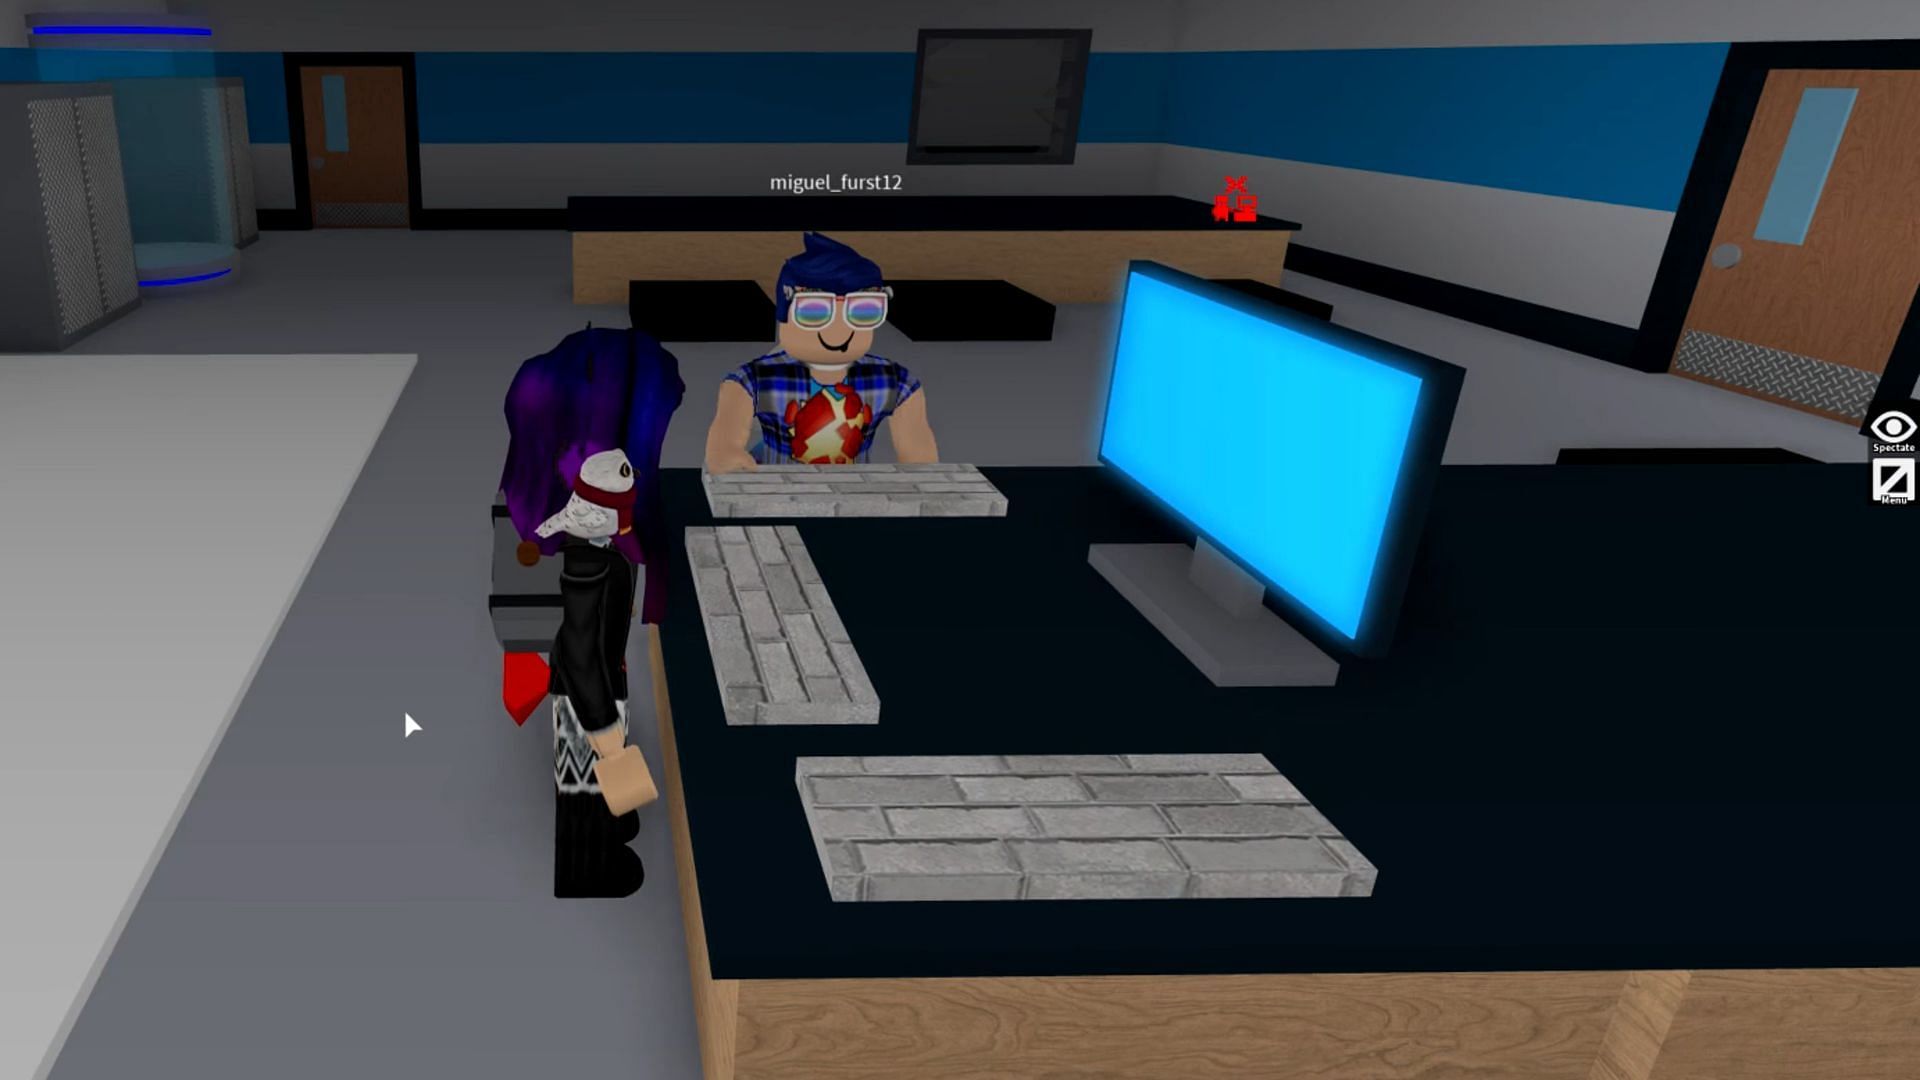 How to get money quickly in Roblox Flee the Facility